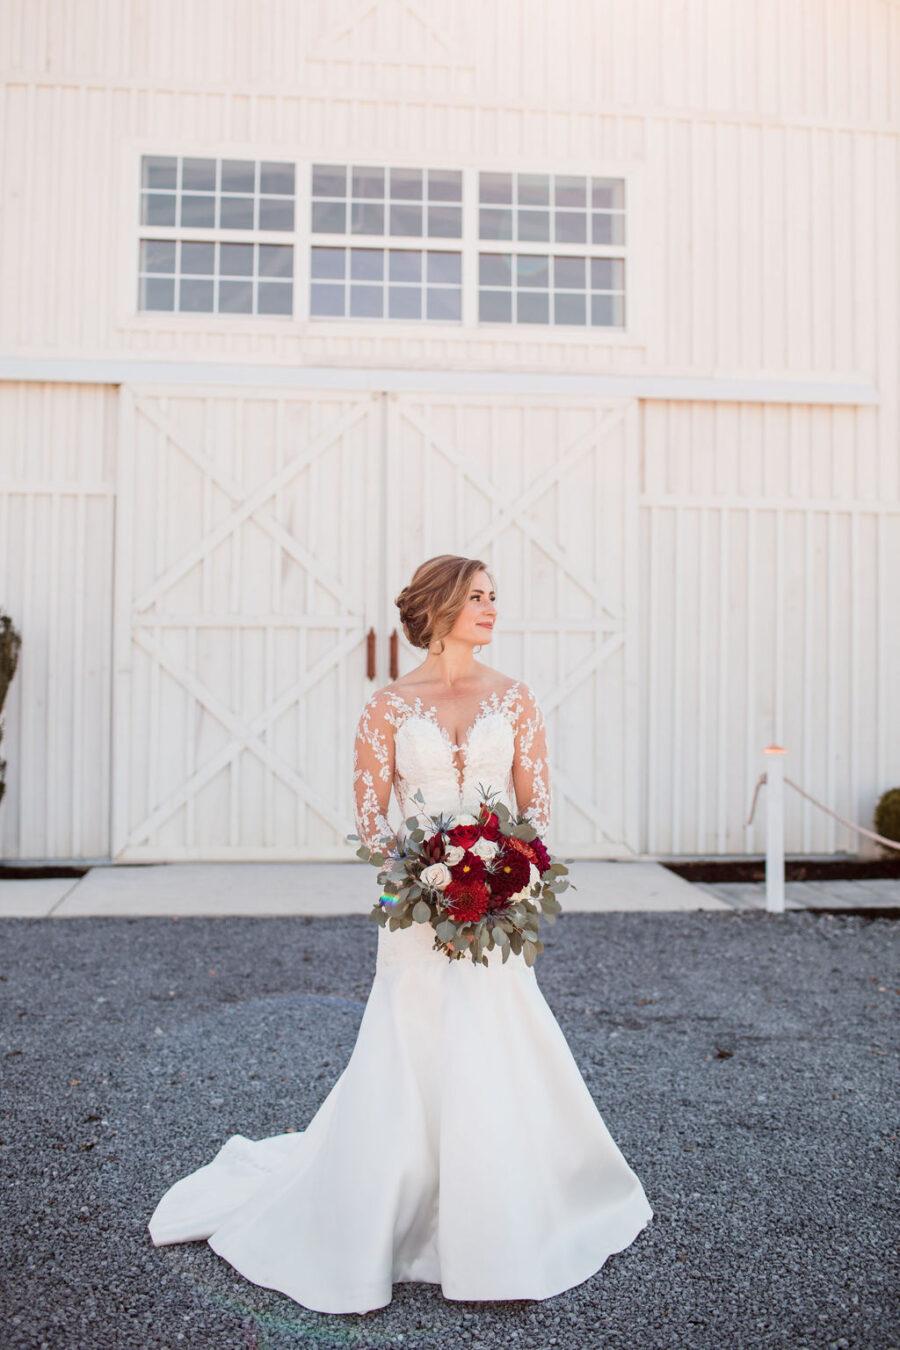 Bridal Portrait with Red Wedding Bouquet: Intimate Barn Wedding from John Myers Photography